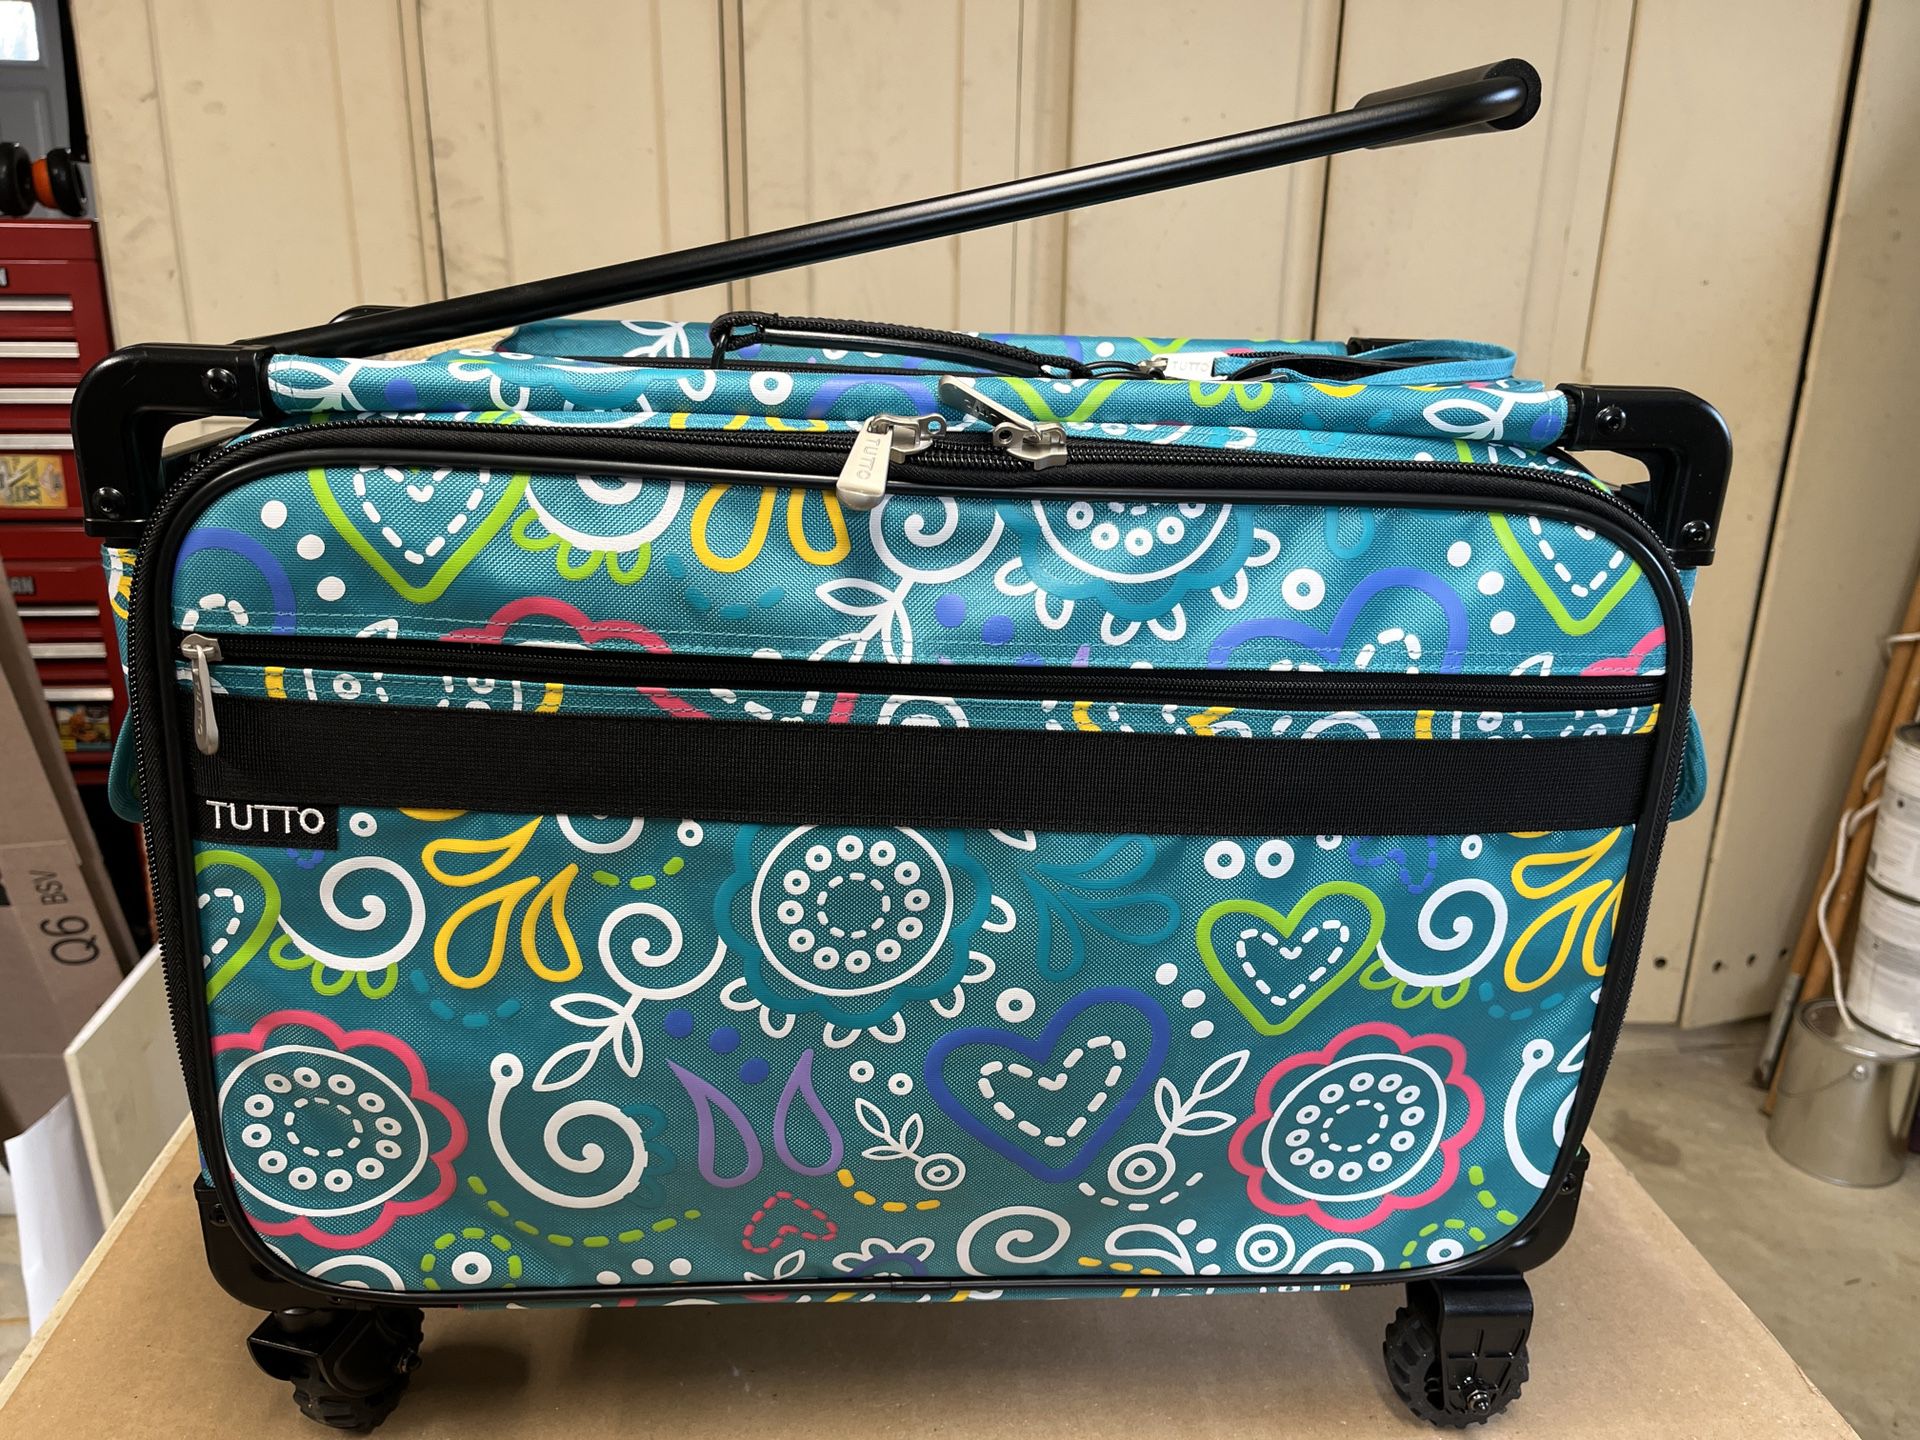 Tutto Sewing Machine Trolley